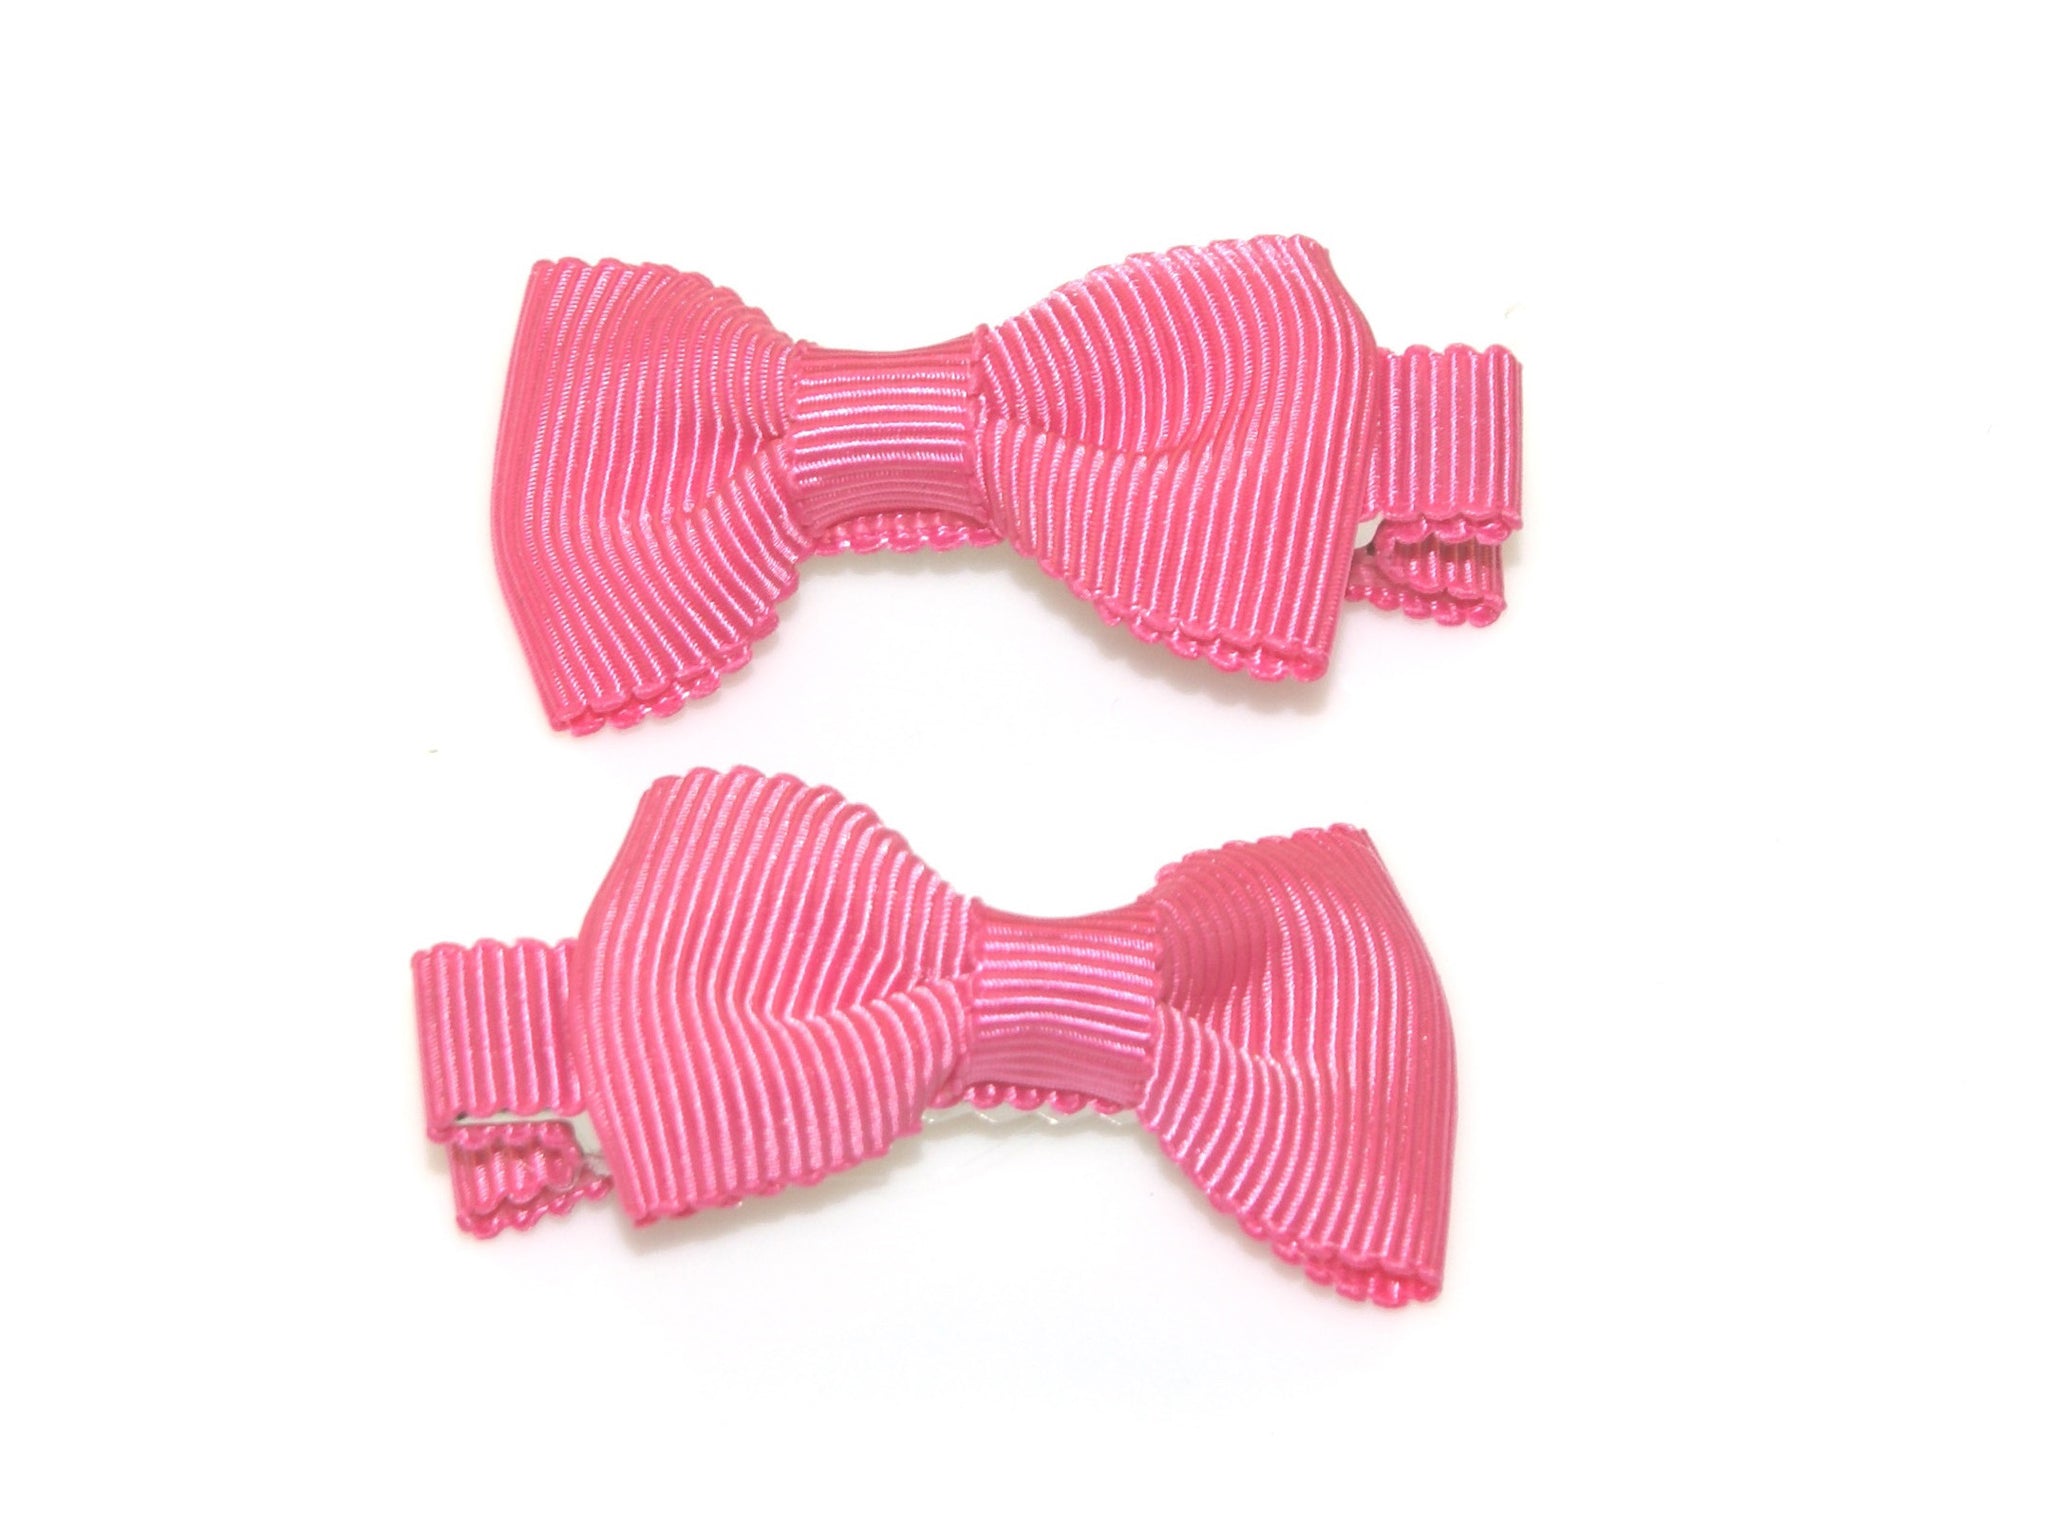 Scalloped Edge Grosgrain Bow Clips - Pink